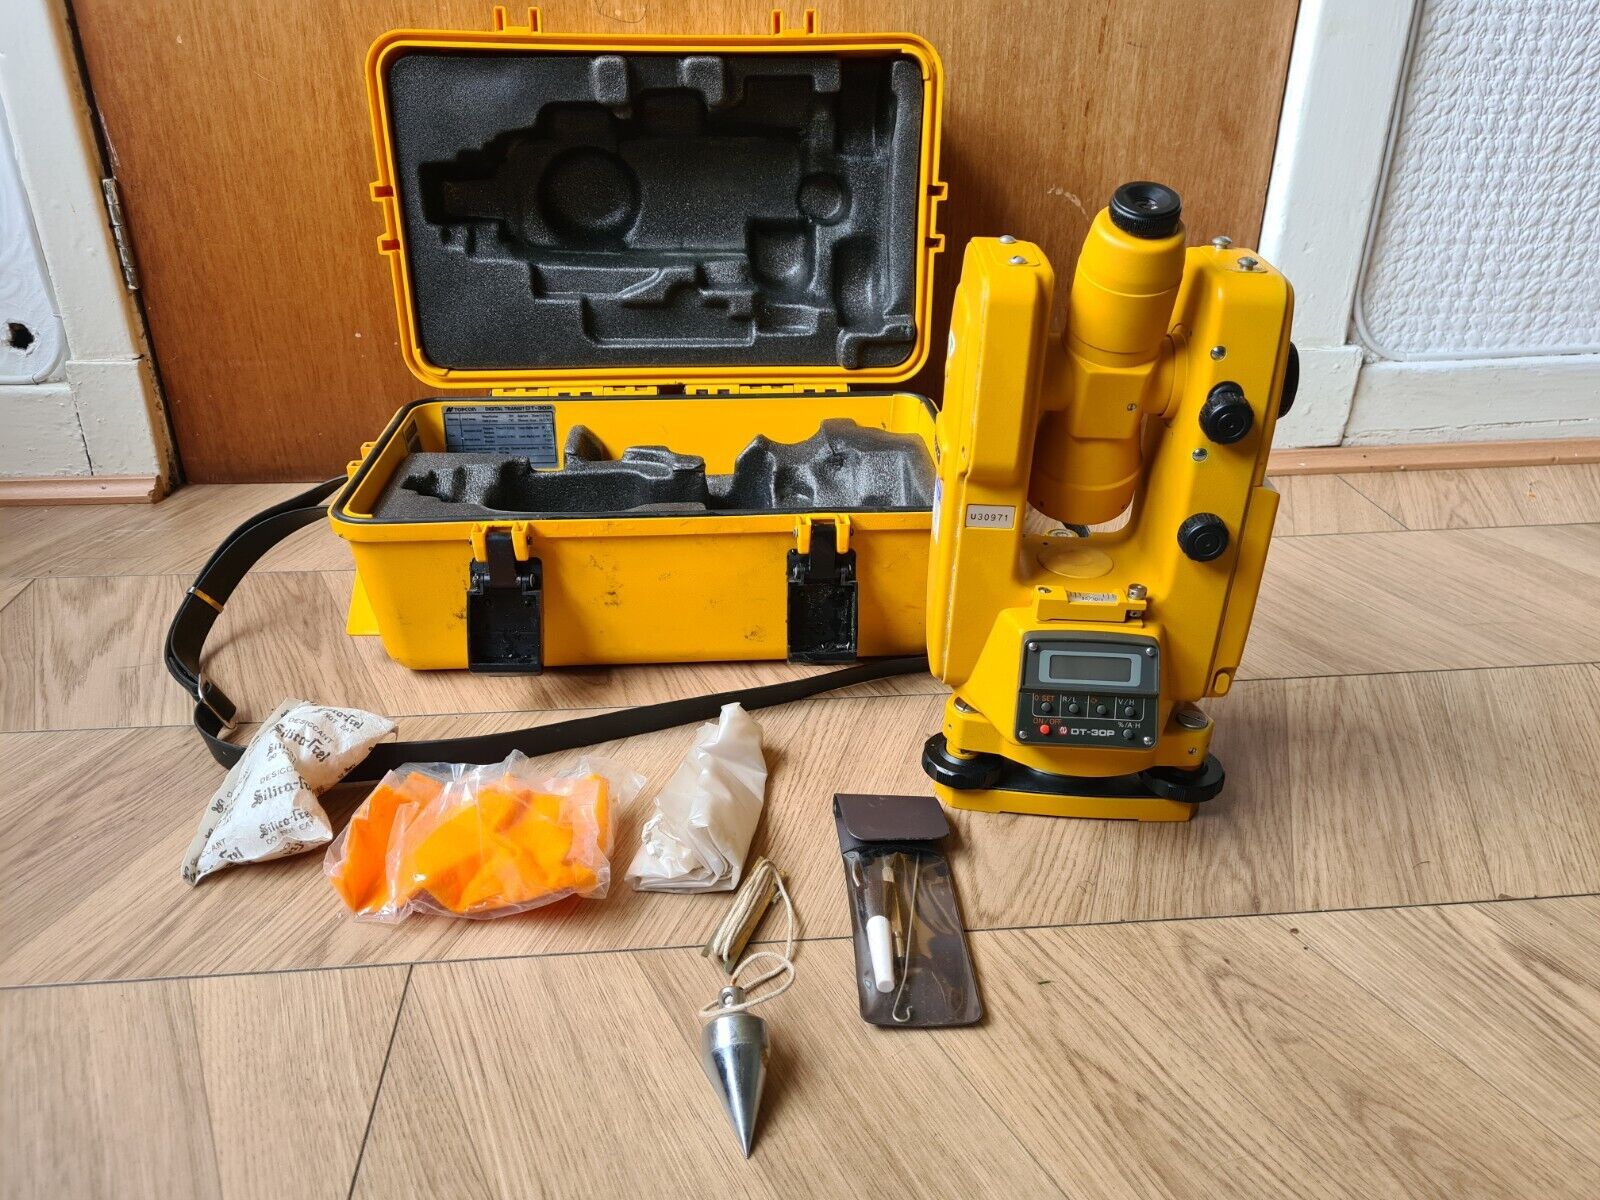 Topcon DT-30P teodolite. No charger